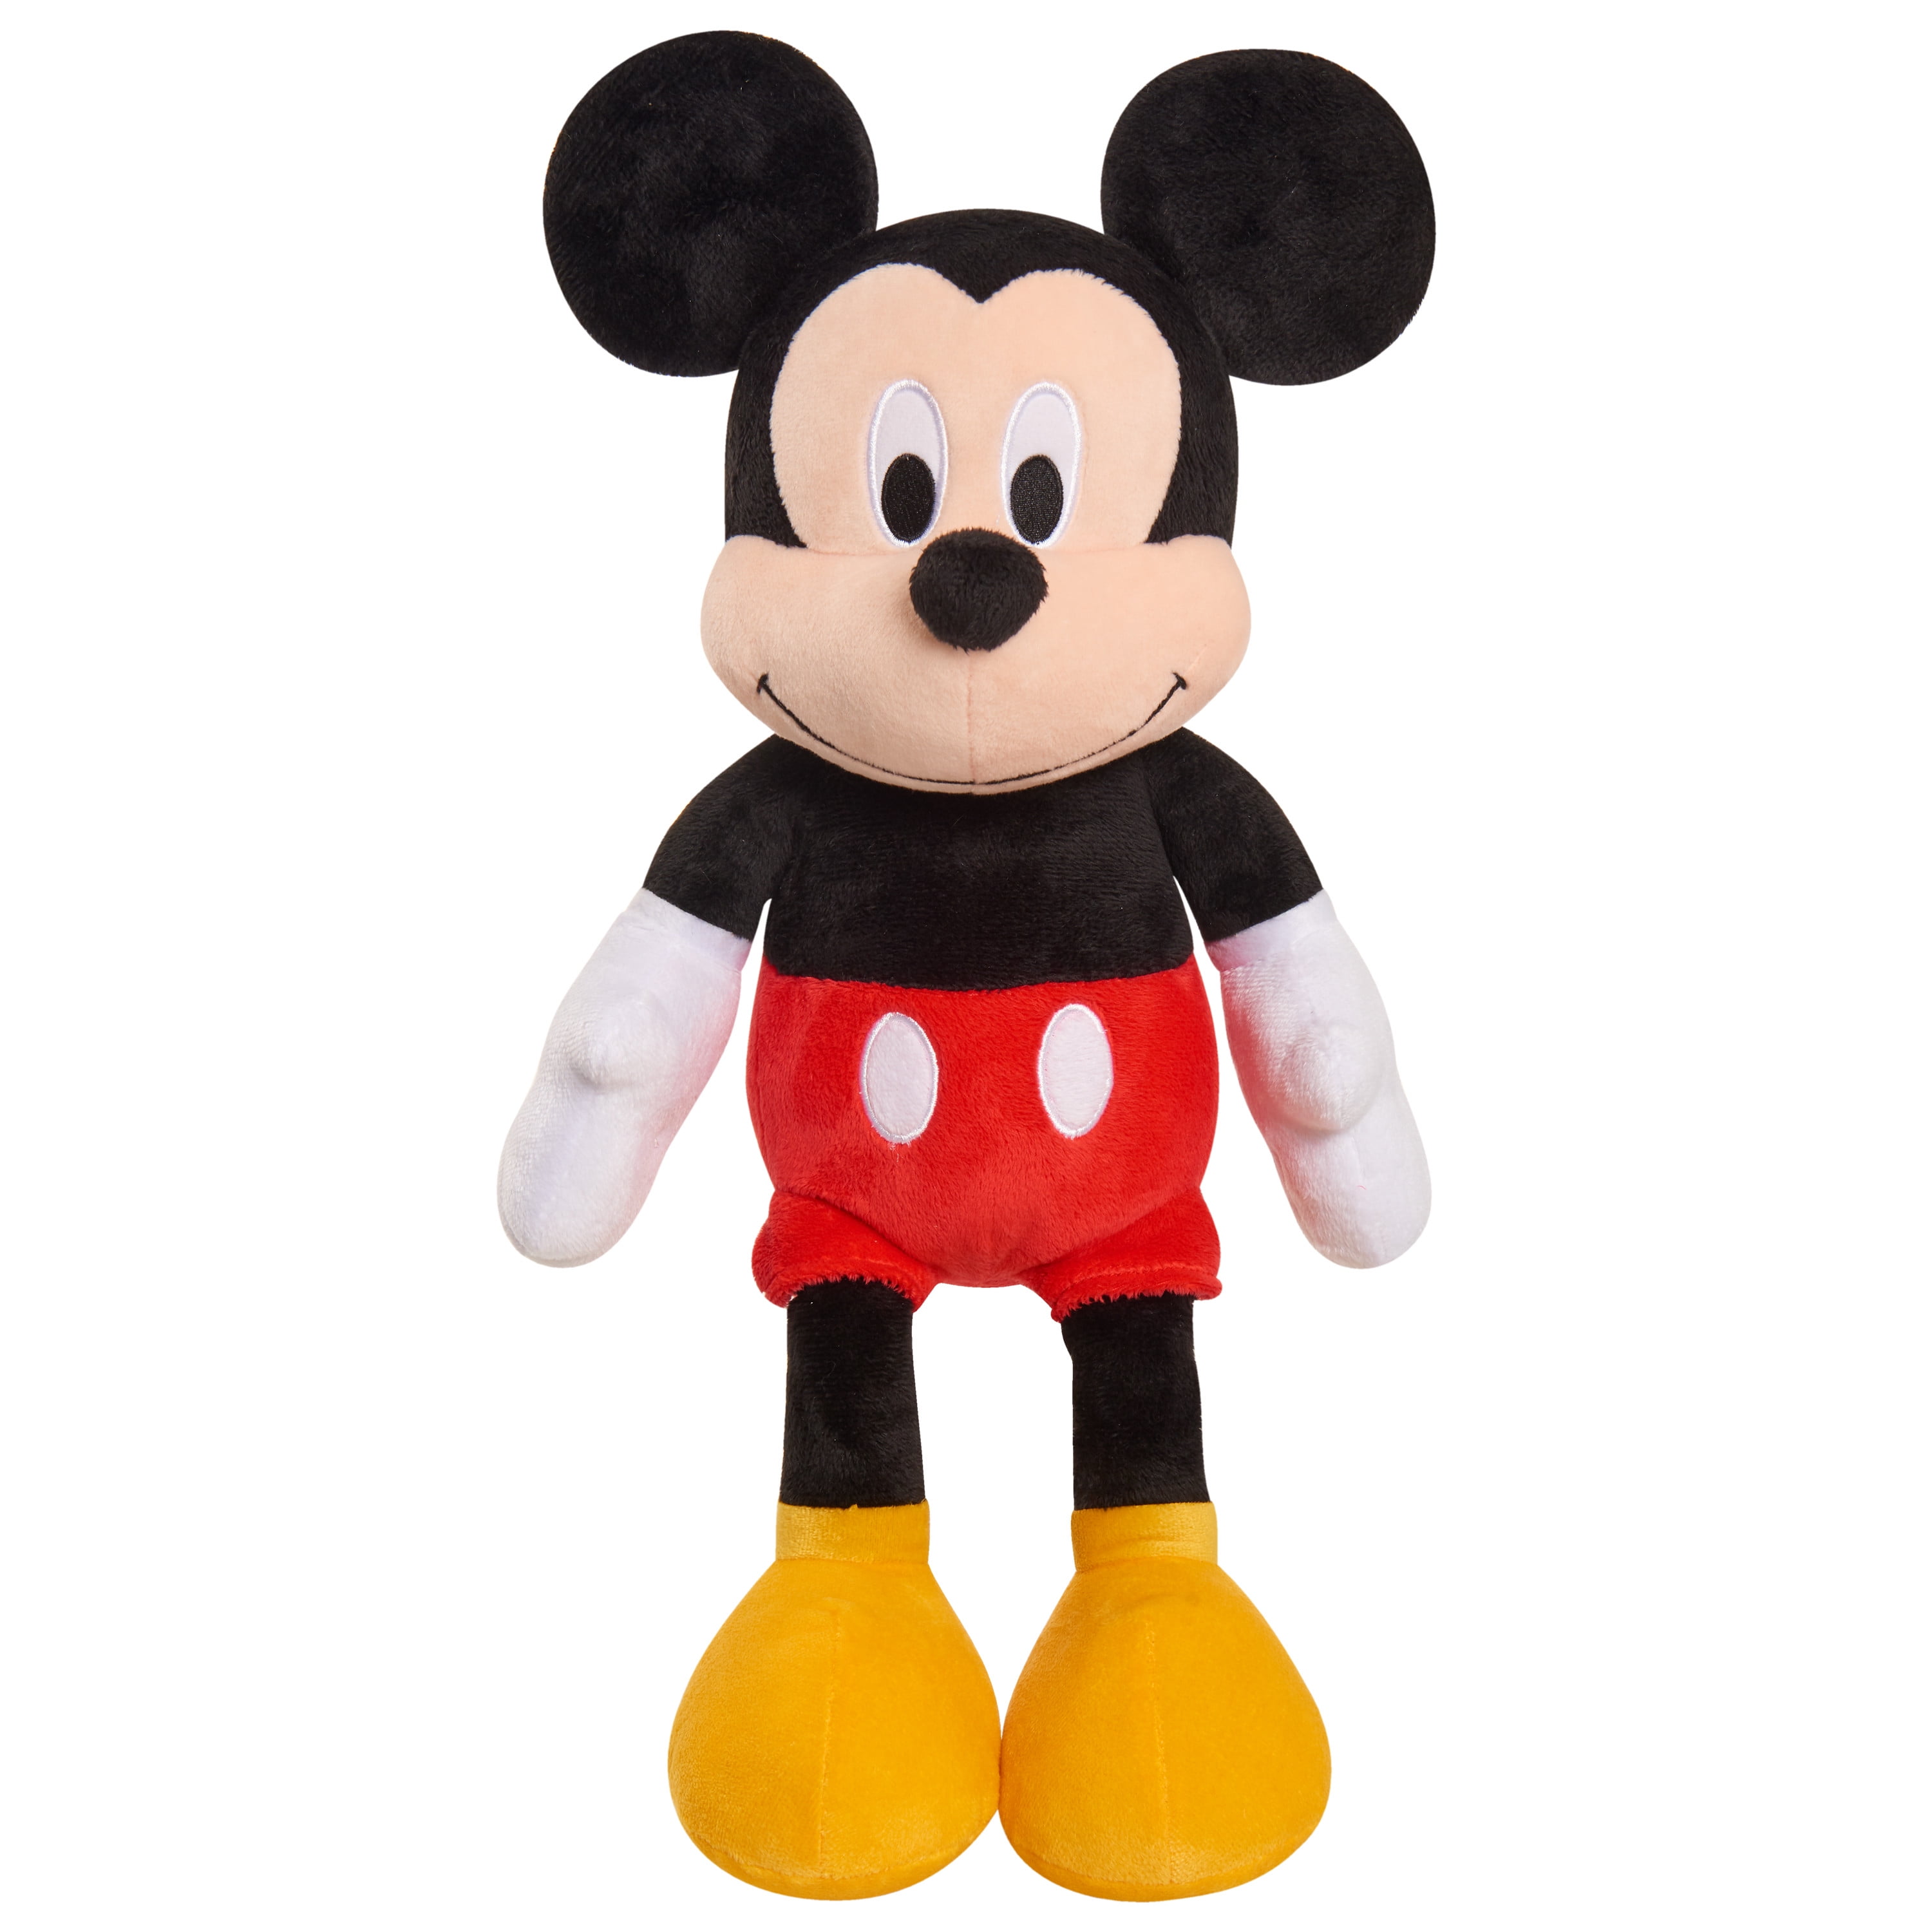 Disney Mickey Mouse 19-inch Plush Stuffed Animal, Officially Licensed Kids Toys for Ages 2 Up, Gifts and Presents